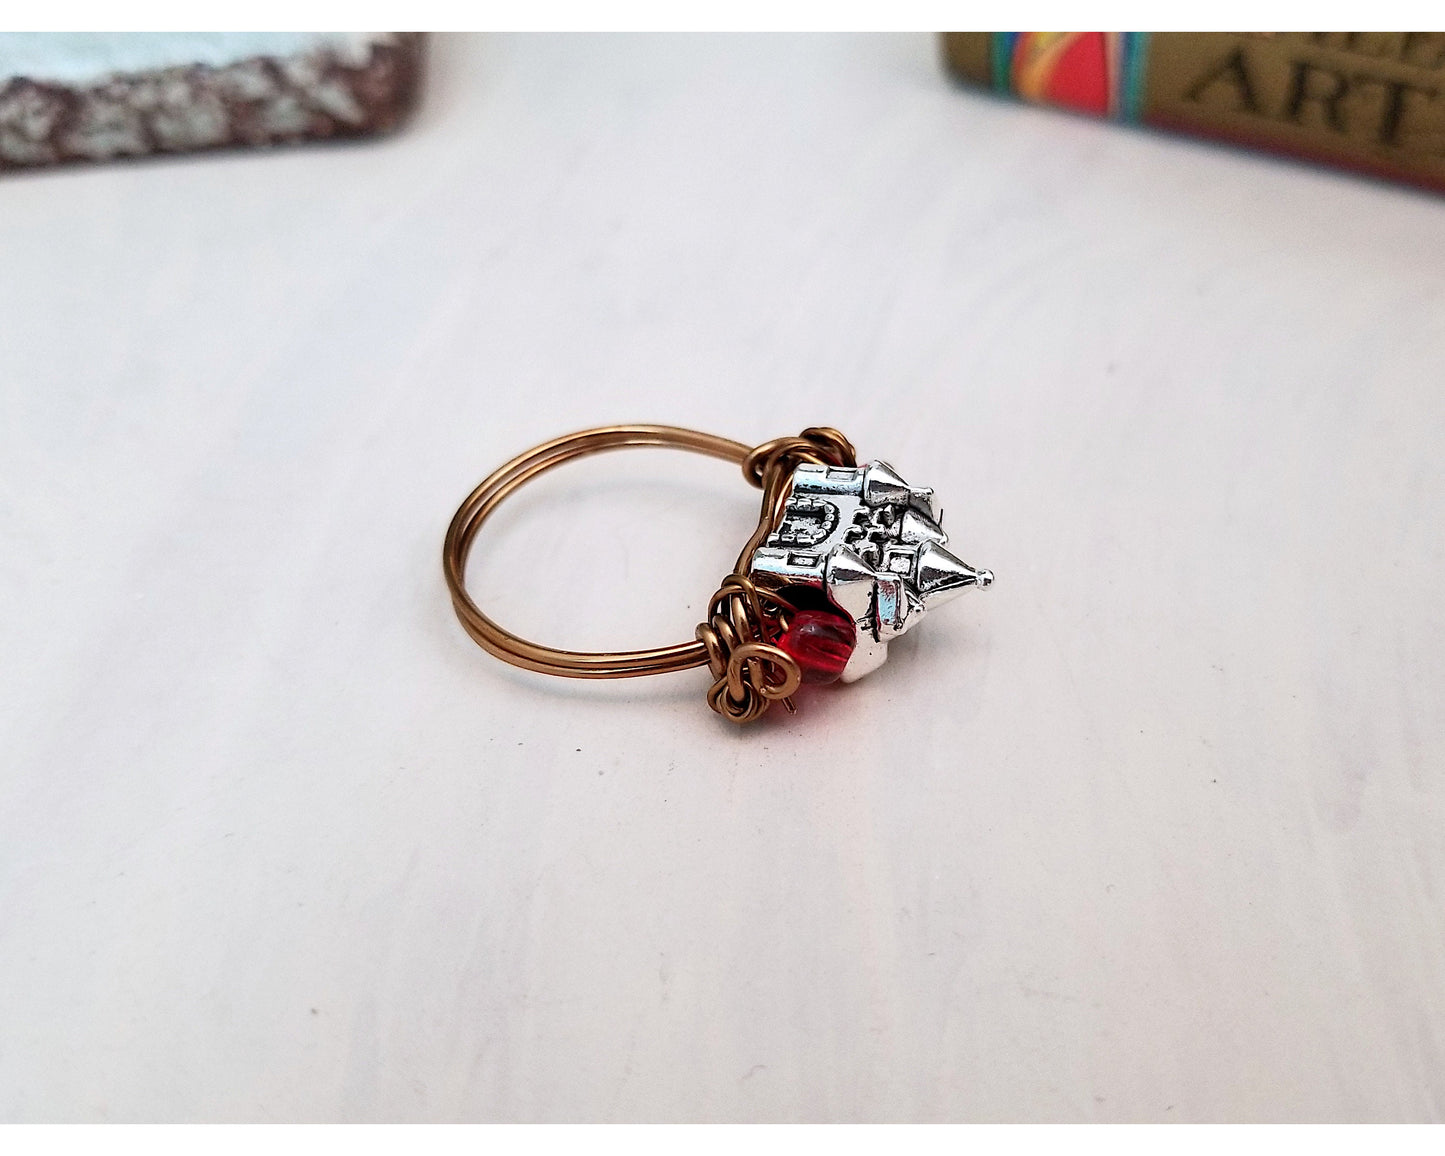 Castle Ring in Pink, Fairy Tale, Wedding, Bridesmaid, Gothic, Renaissance, Medieval, Choice of Colors and Metals